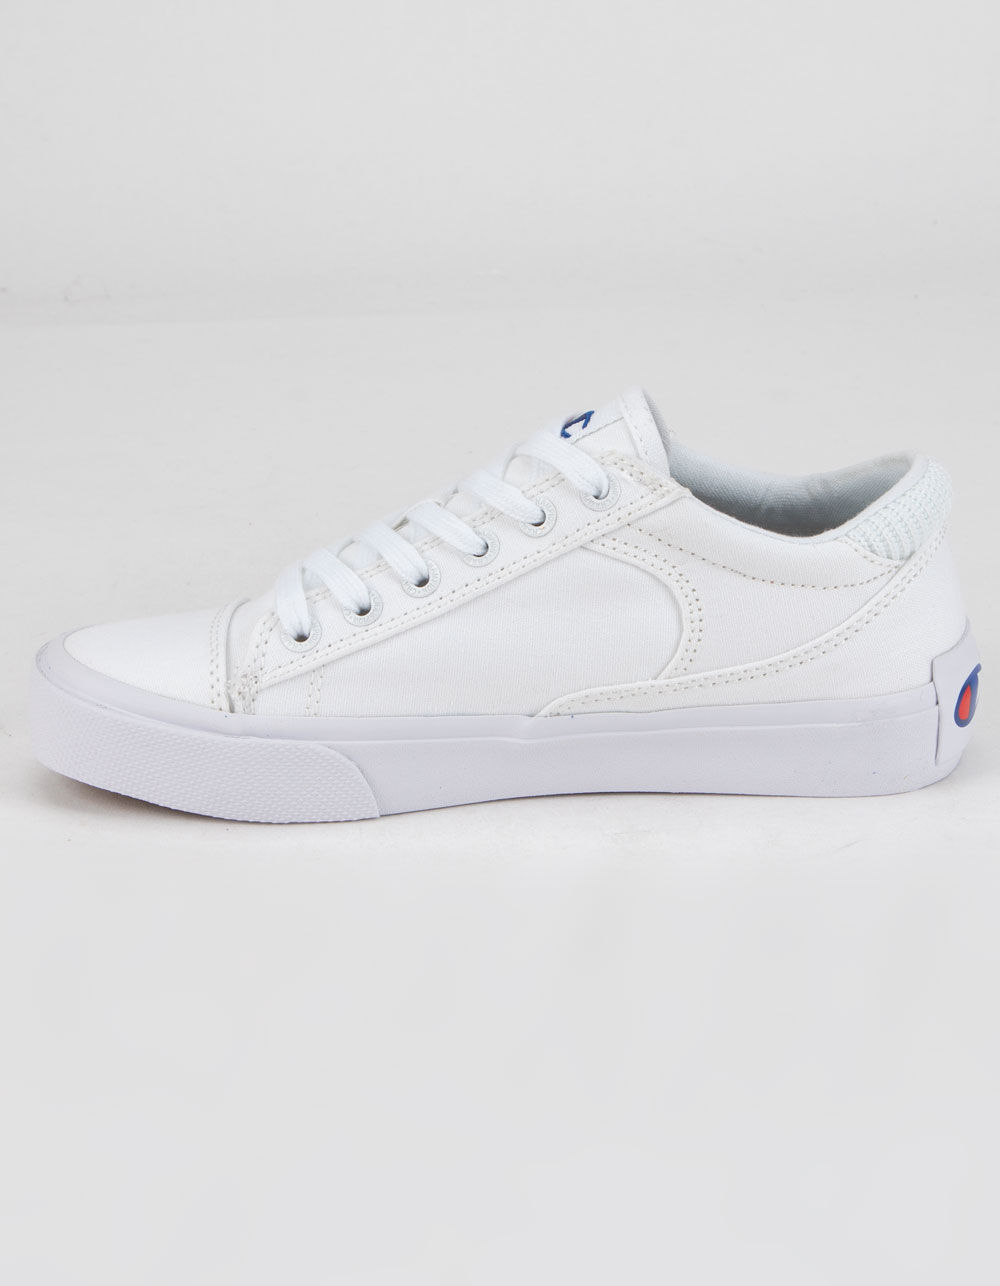 CHAMPION Fringe Lo Girls White Canvas Sneakers - WHITE | Tillys